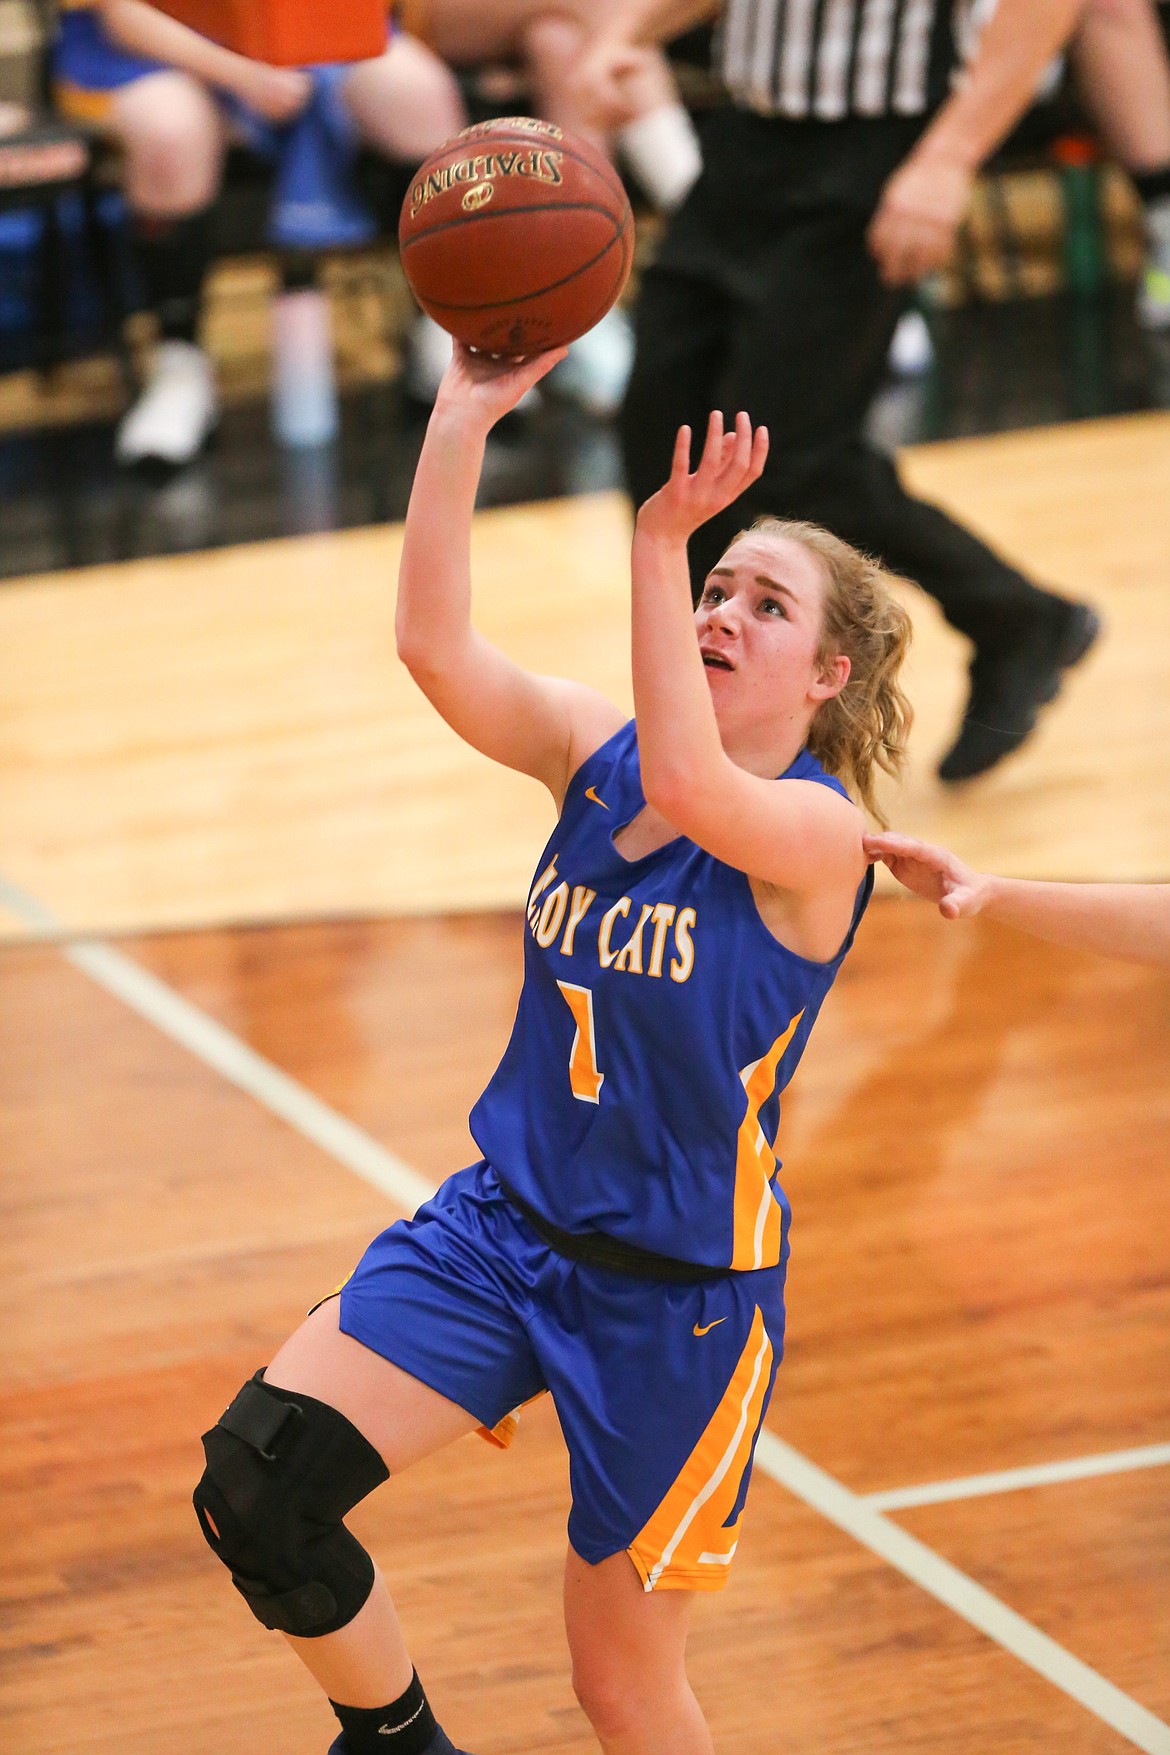 Katelyn Matteson rises for a shot during a game at Priest River last season. Matteson, who scored 32 points in the district final last year, will be key to the Lady Cats' success in the 2020-21 season.